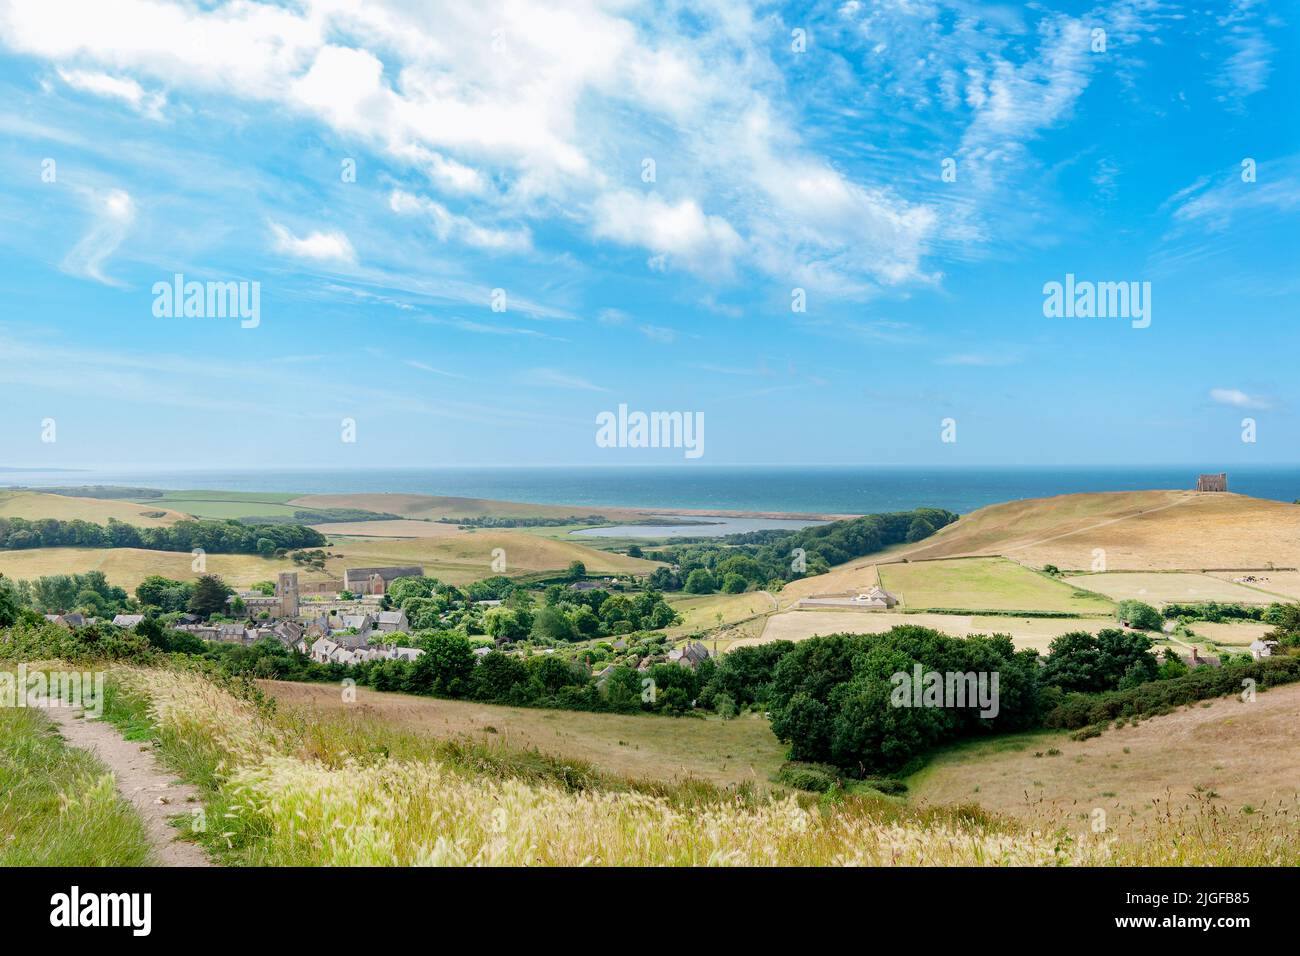 Abbotsbury, Dorset. A landscape hilltop view across countryside to the Jurassic coastline and English channel including the village of Abbotsbury Stock Photo